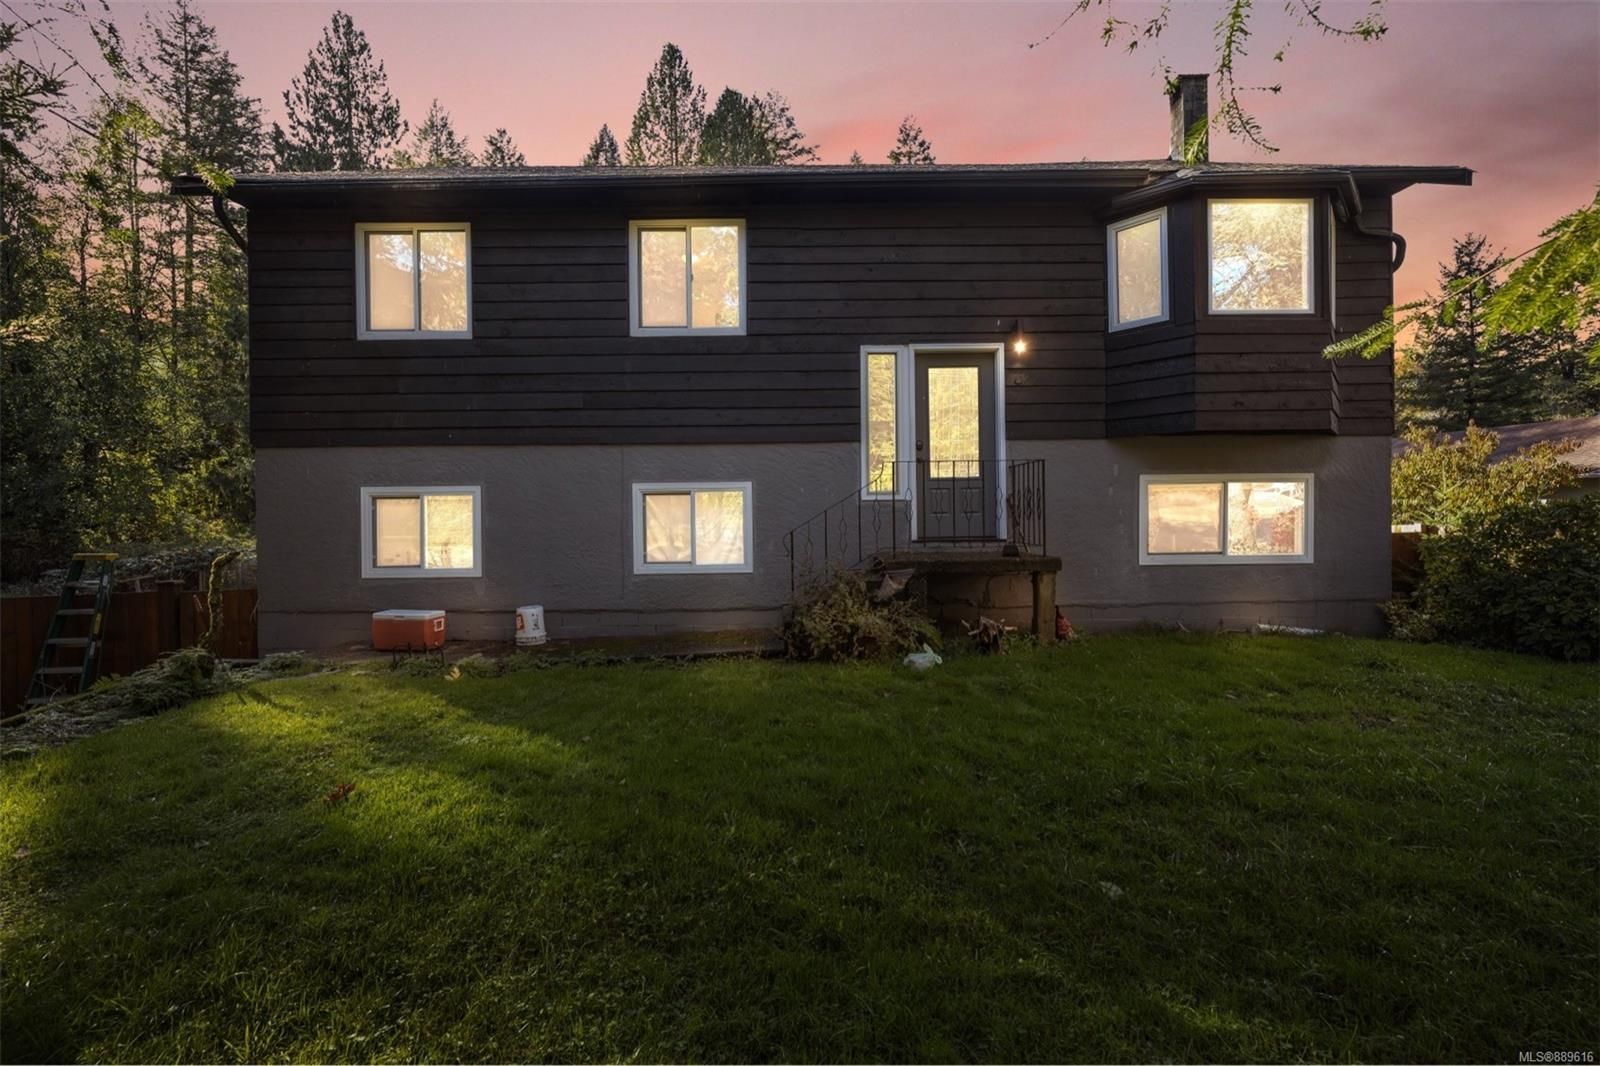 I have sold a property at 1844 Connie Rd in Sooke